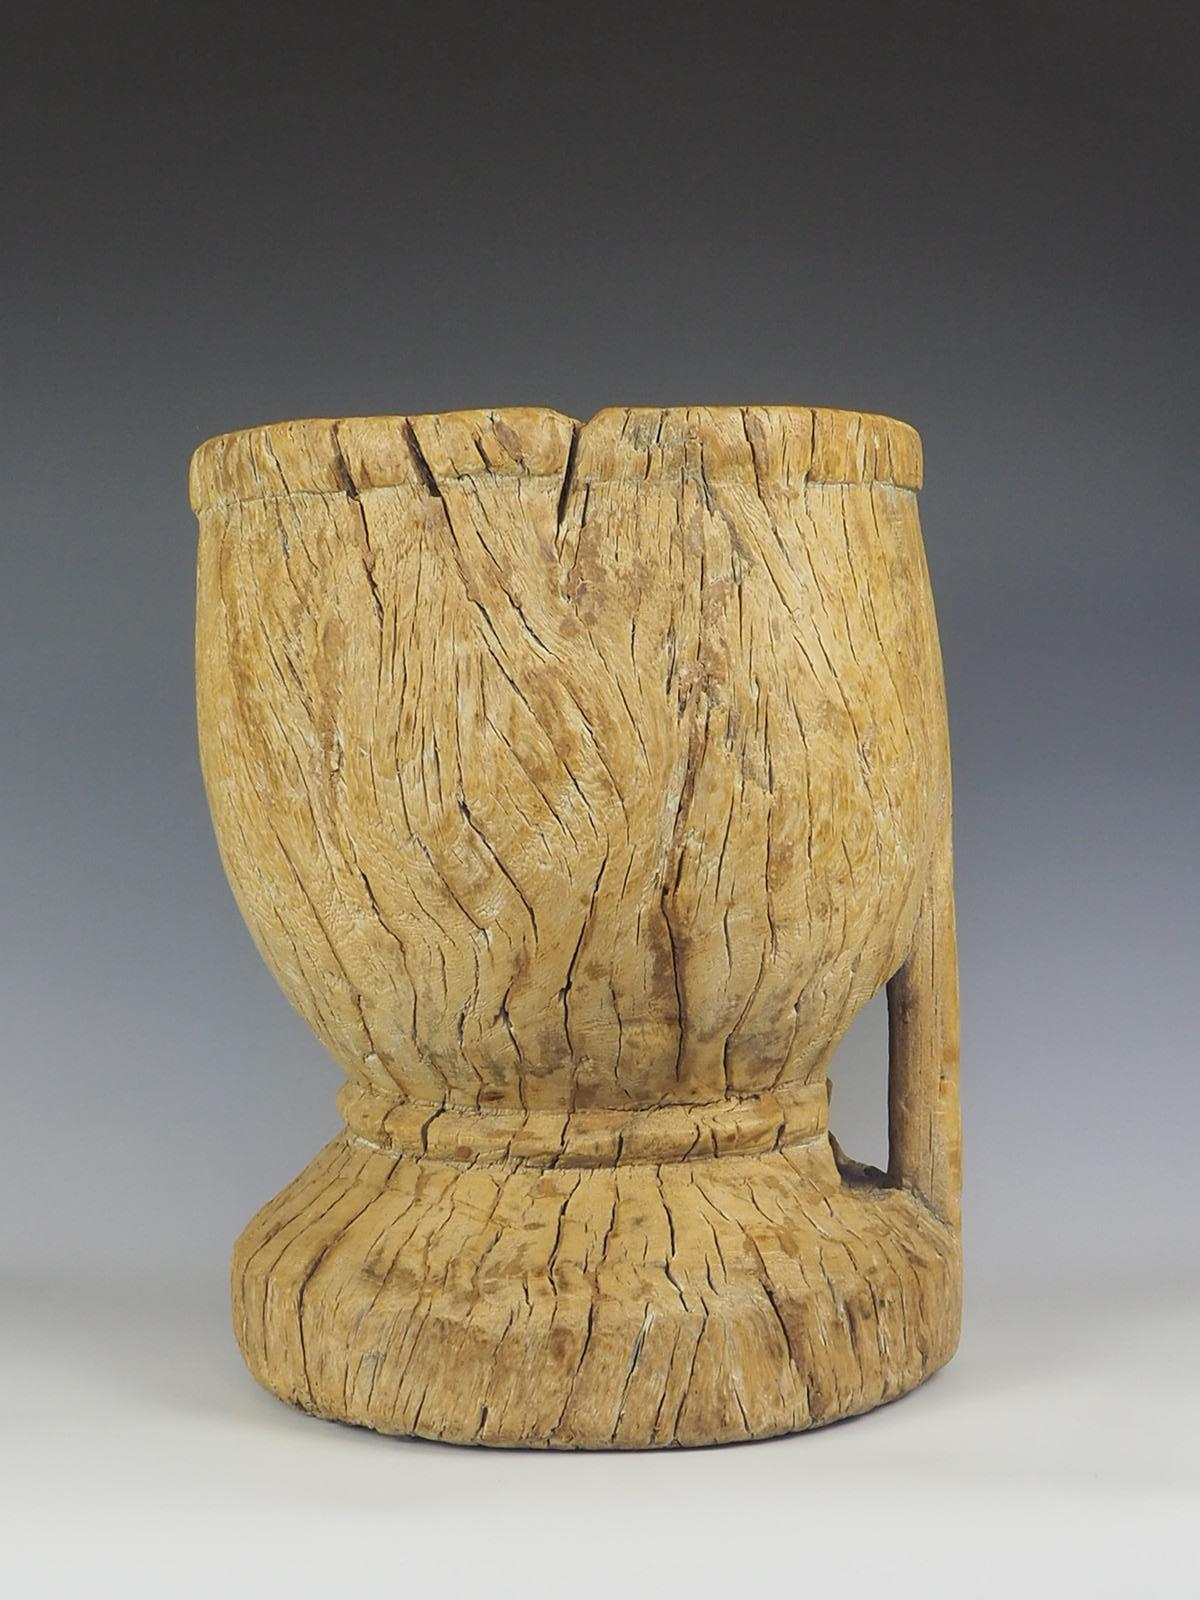 19th century hand carved large wooden Elm mortar or grain bowl. Carved from a solid piece of Elm,

Oversized and decorative piece that would look incredible in any home.